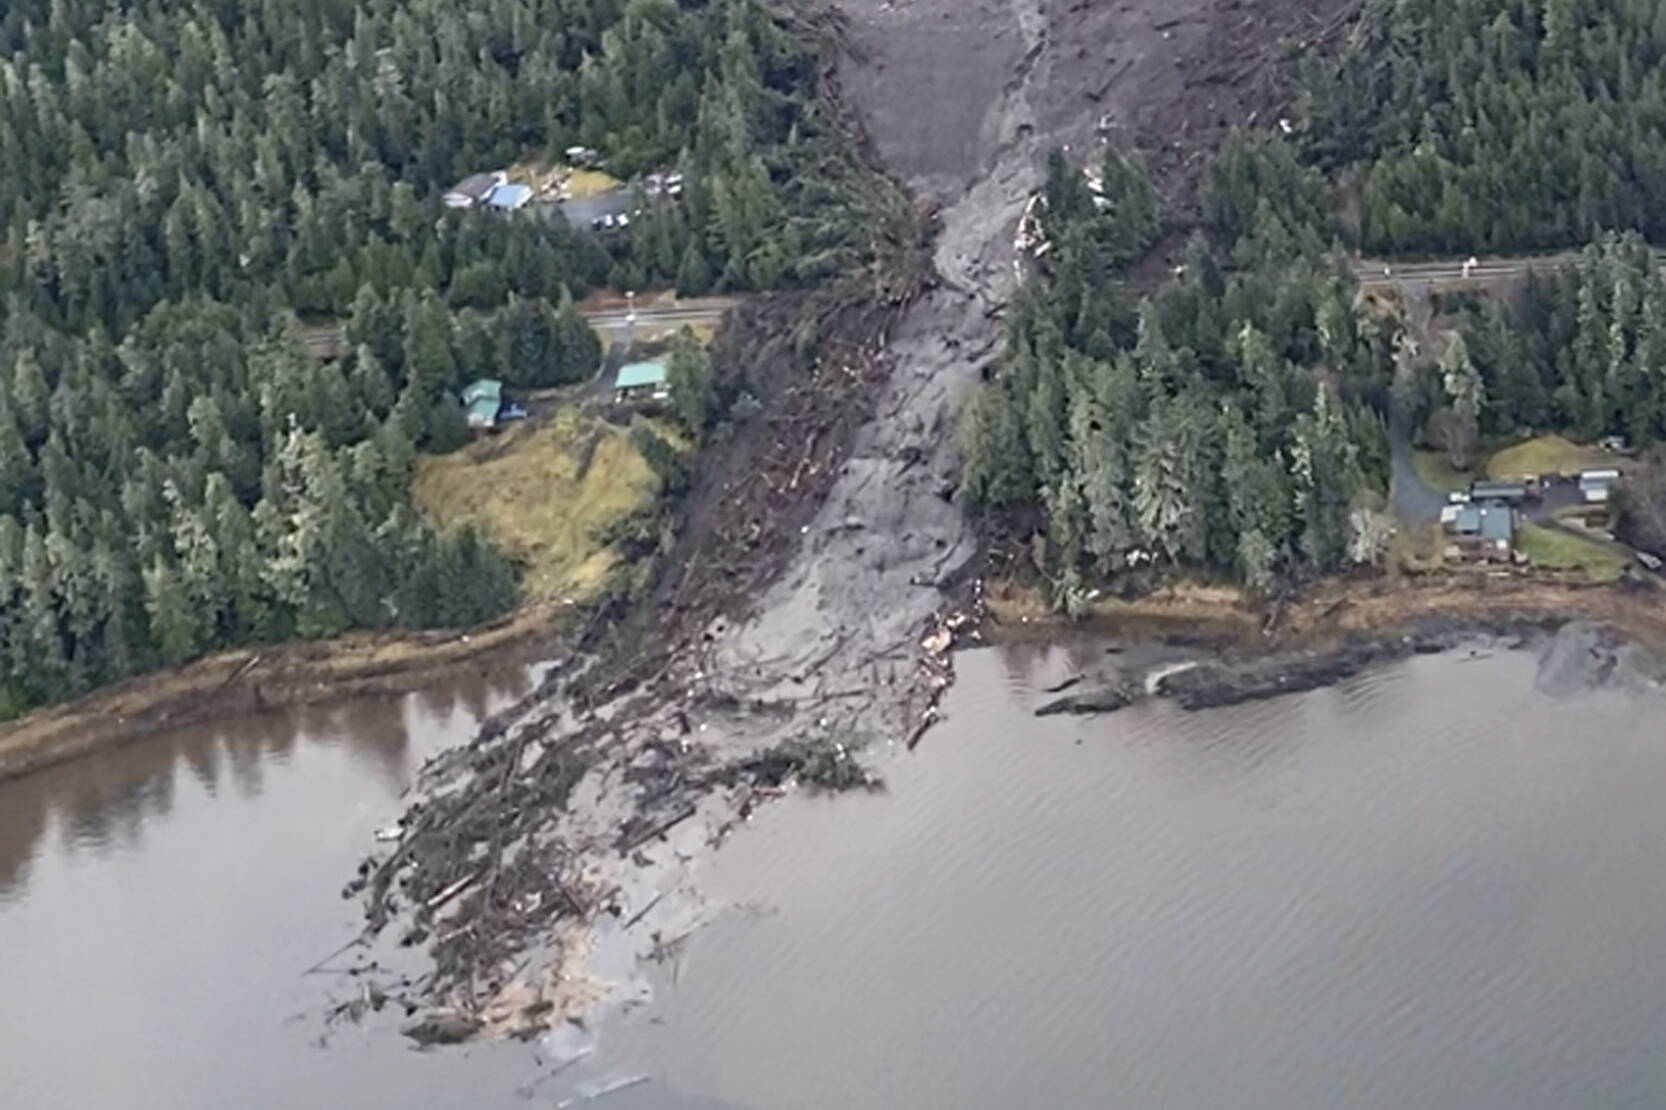 This image from video provided by Sunrise Aviation shows the landslide that occurred the previous evening near Wrangell on Monday. Authorities said at least one person died and others were believed missing after the large landslide roared down a mountaintop into the path of three homes. (Sunrise Aviation via AP)